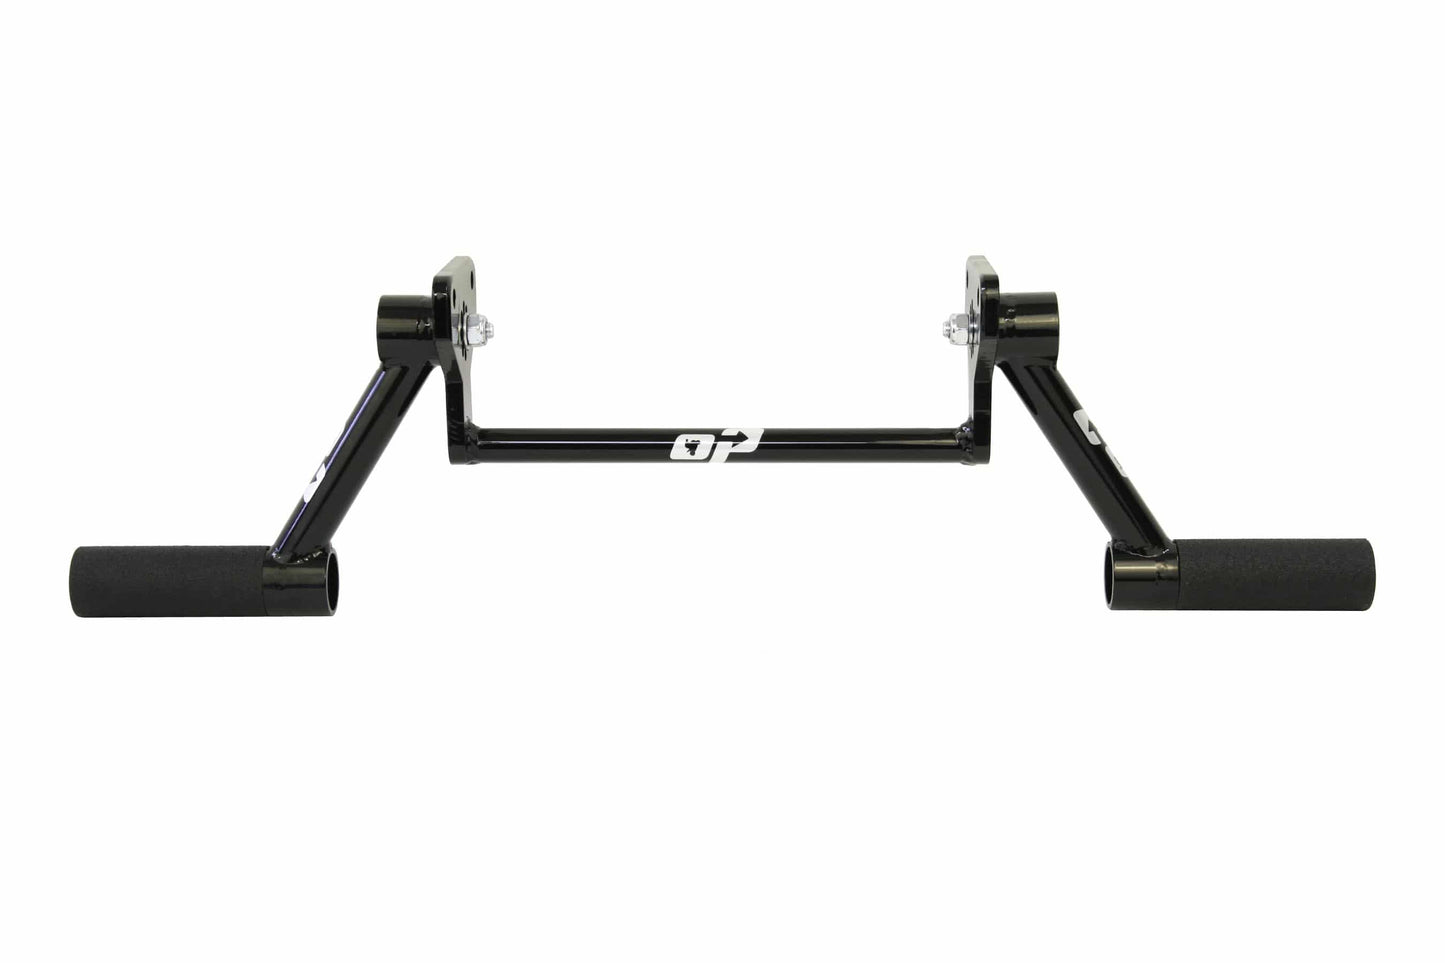 On Point 04-05 GSXR 600/750 SUBCAGE (Adjustable Peg Position)